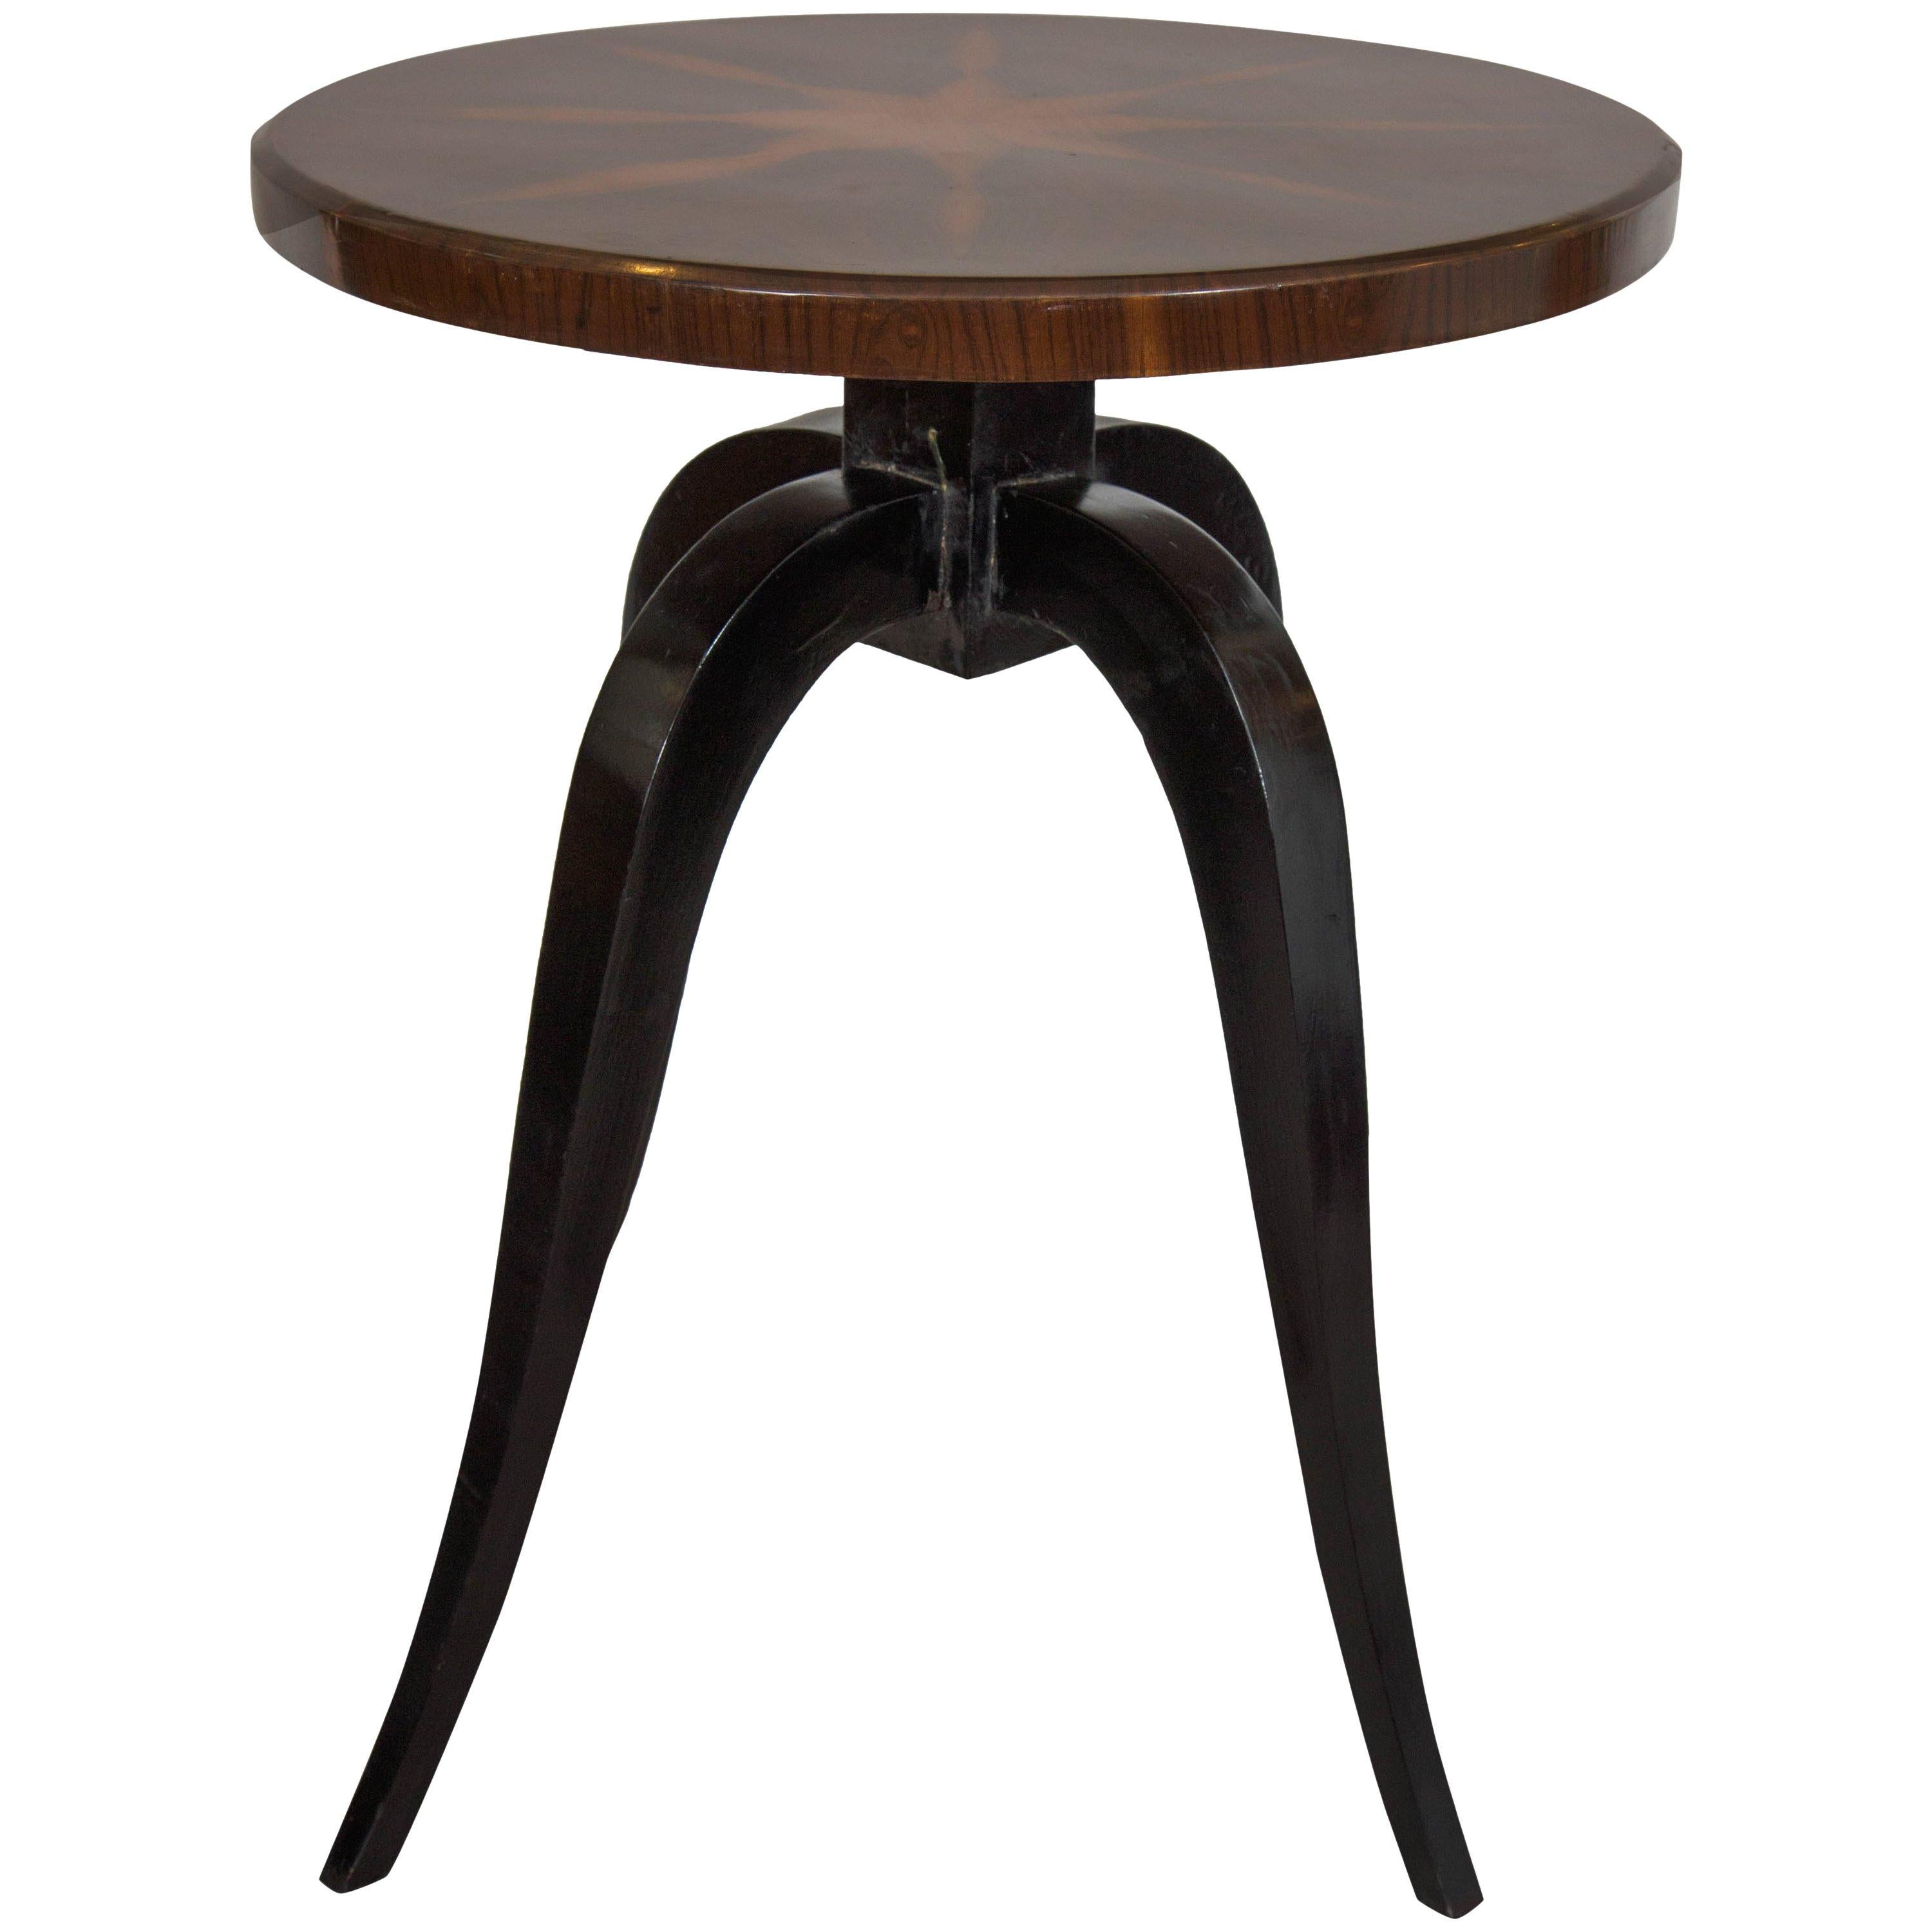 Midcentury Art Deco Side Table with Burl Wood Top and Ebonized Tripod Legs